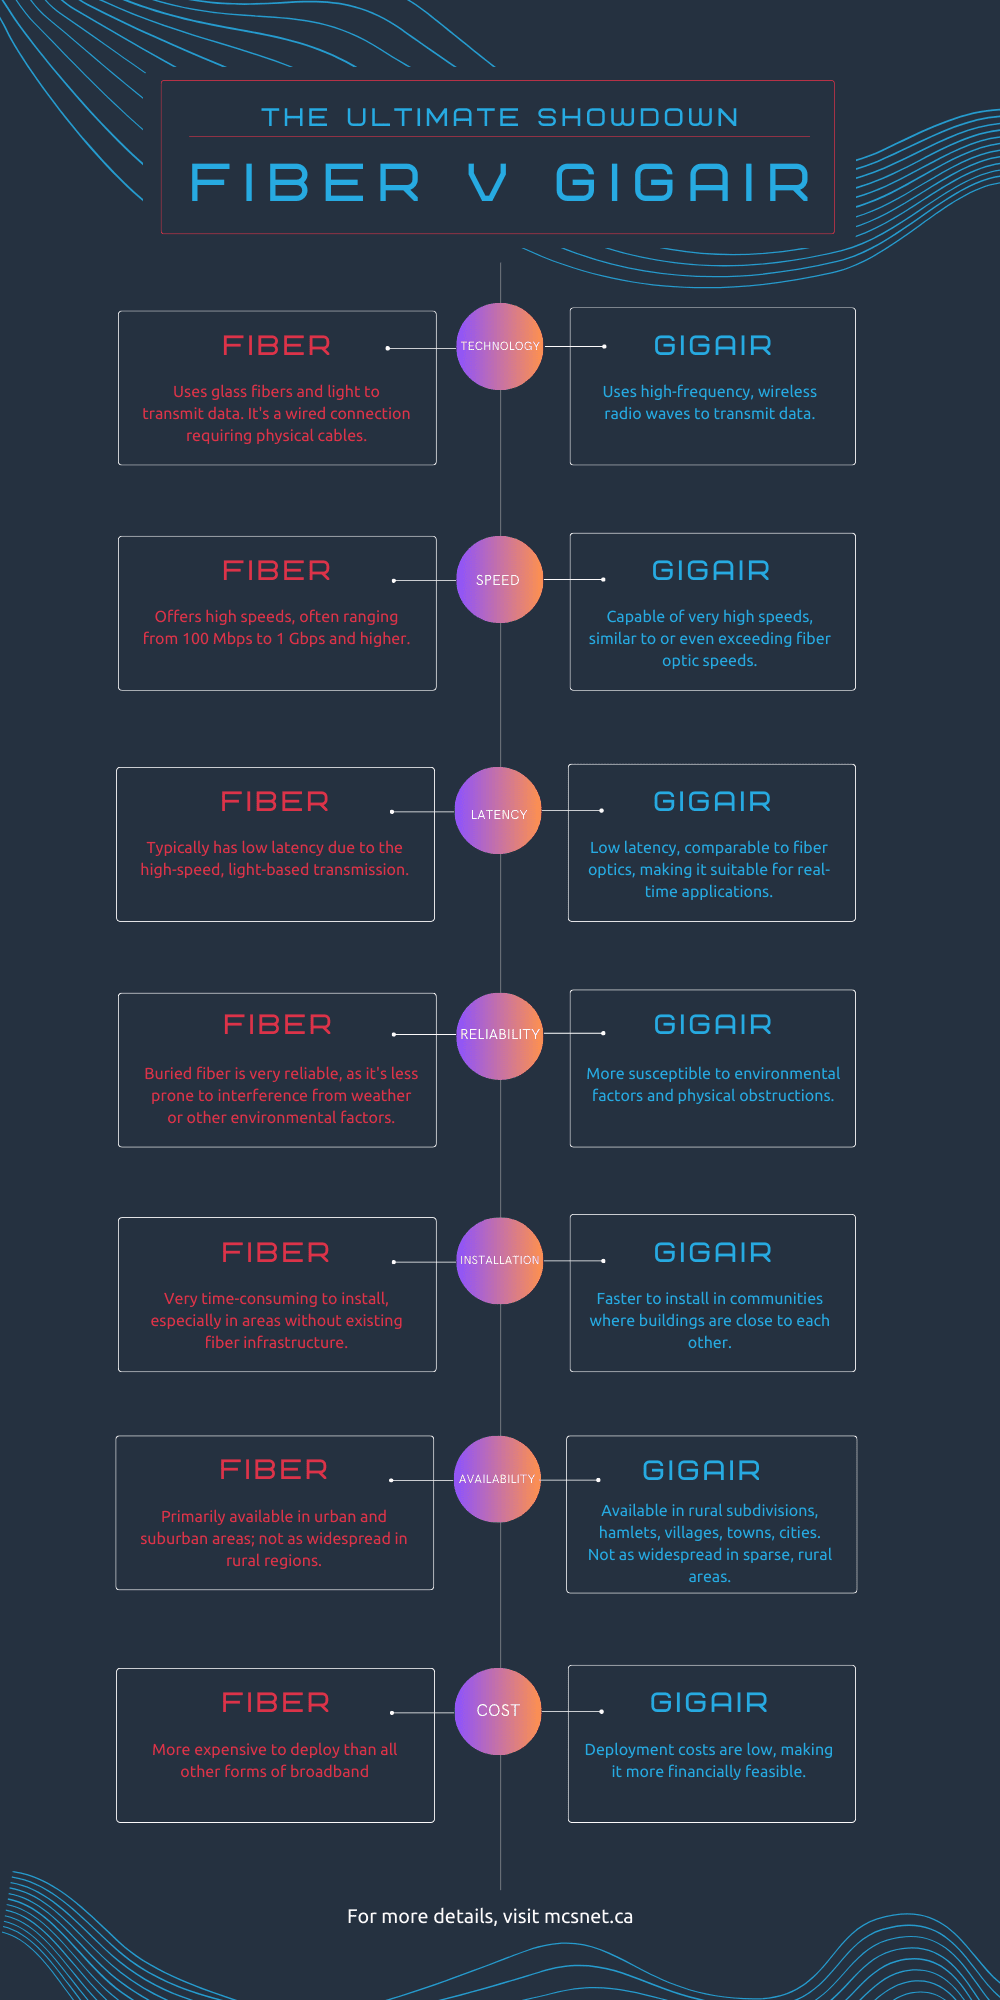 An infographic comparing different features of Fiber and Gigair.